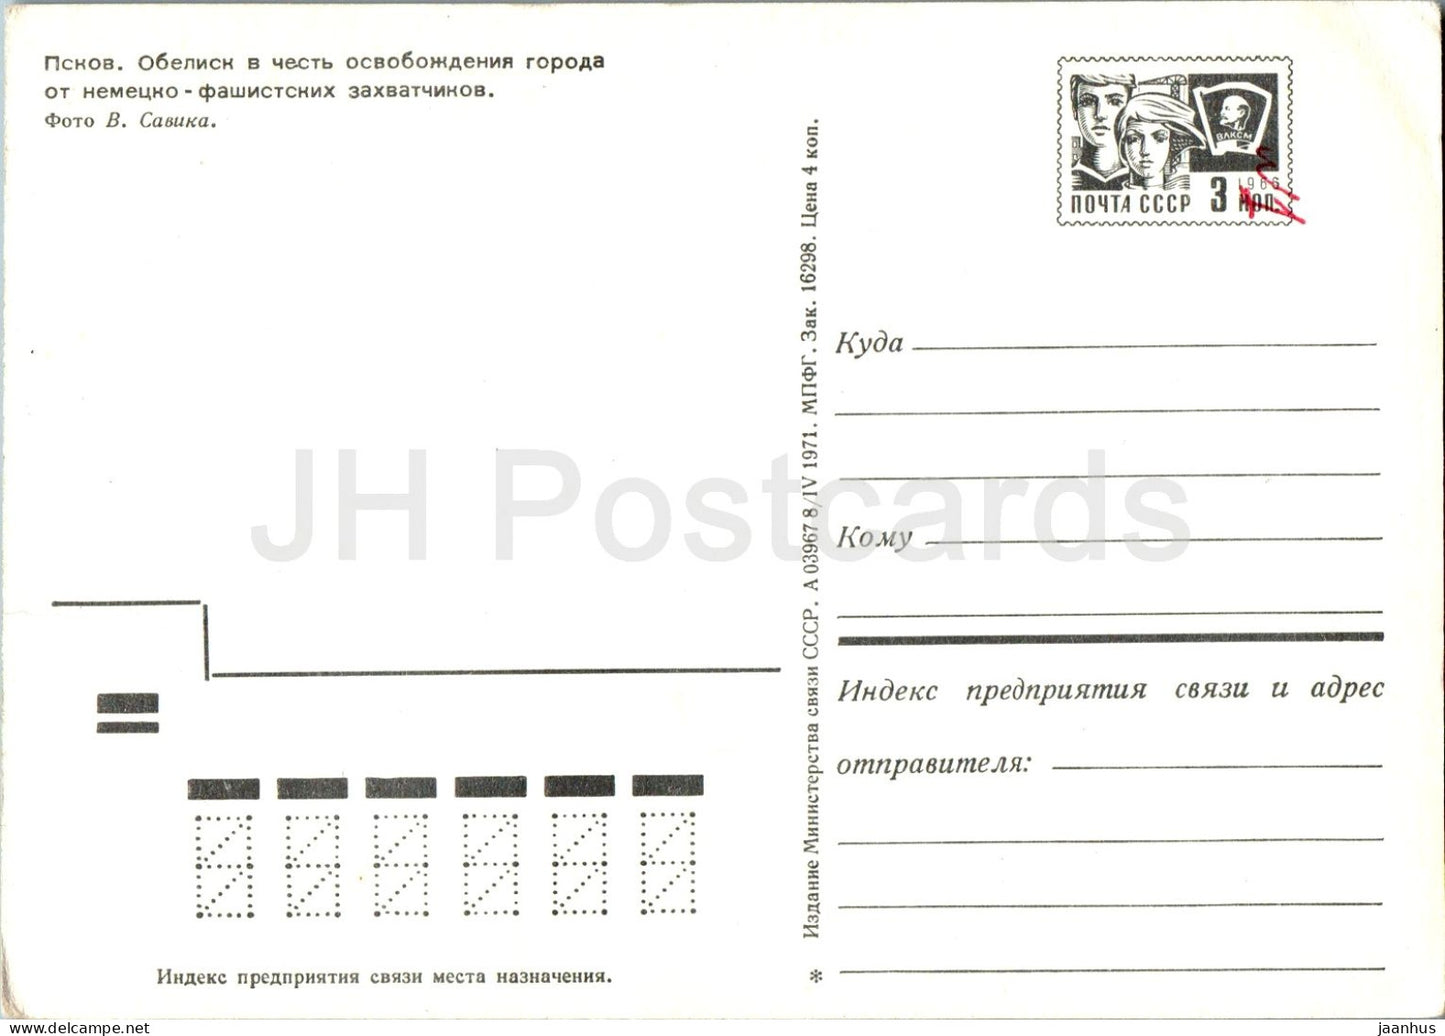 Pskov - obelisk in honor of the liberation of the city - tank - military postal stationery - 1971 - Russia USSR - unused